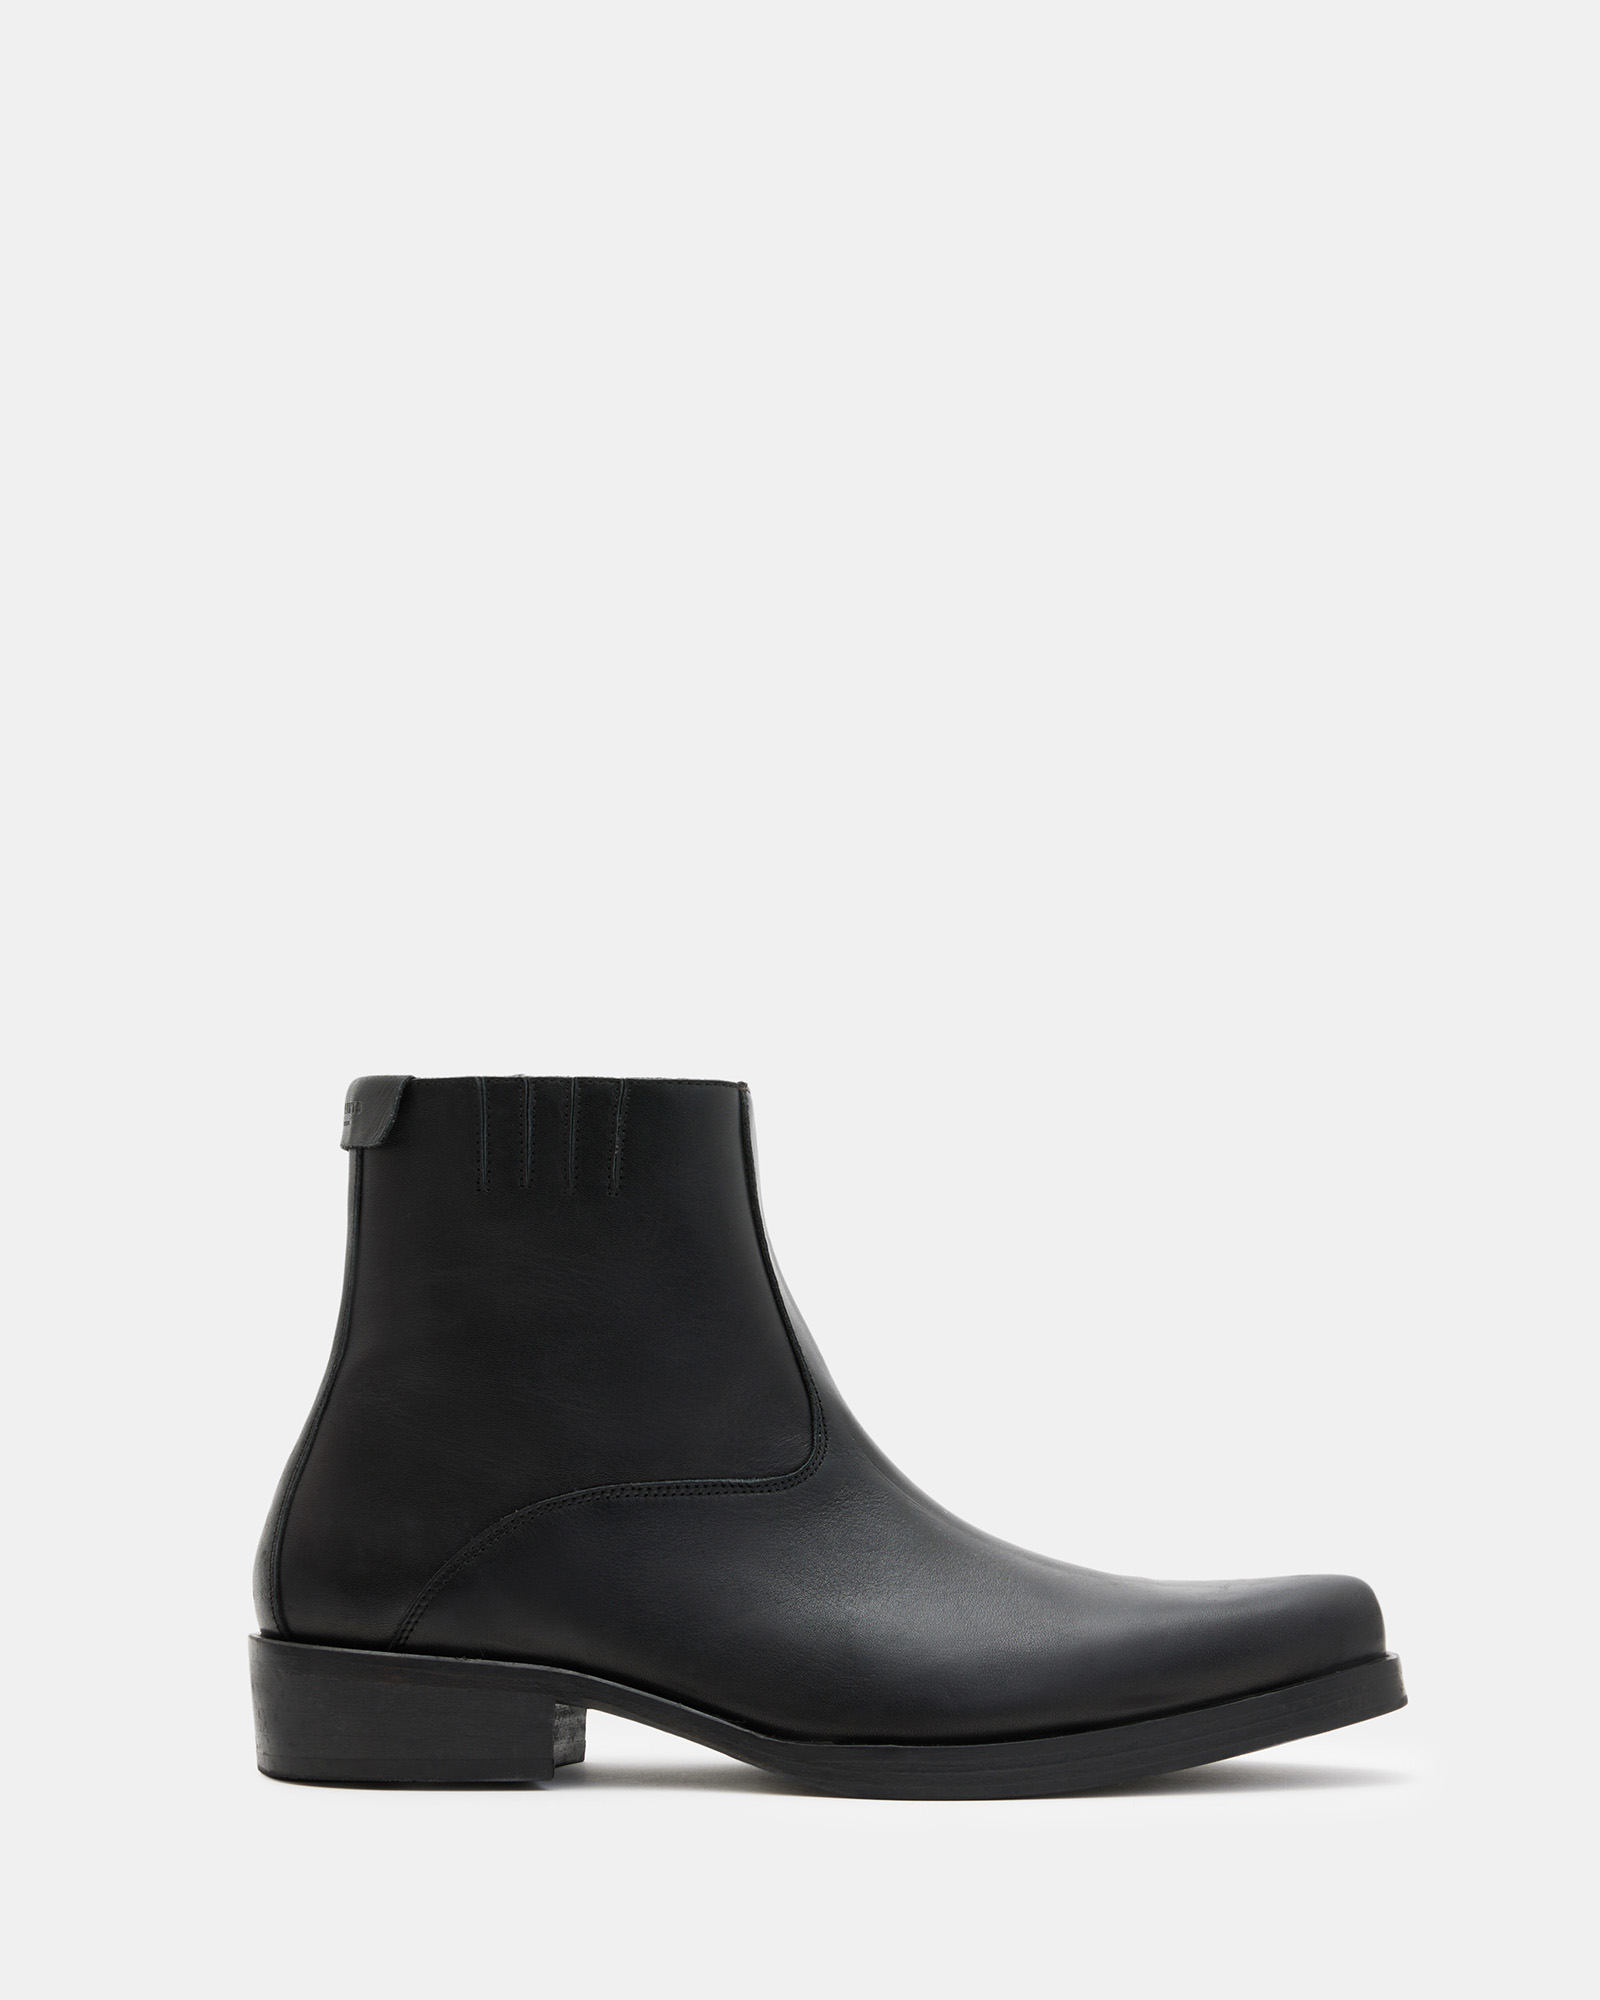 AllSaints Booker Leather Zip Up Boots